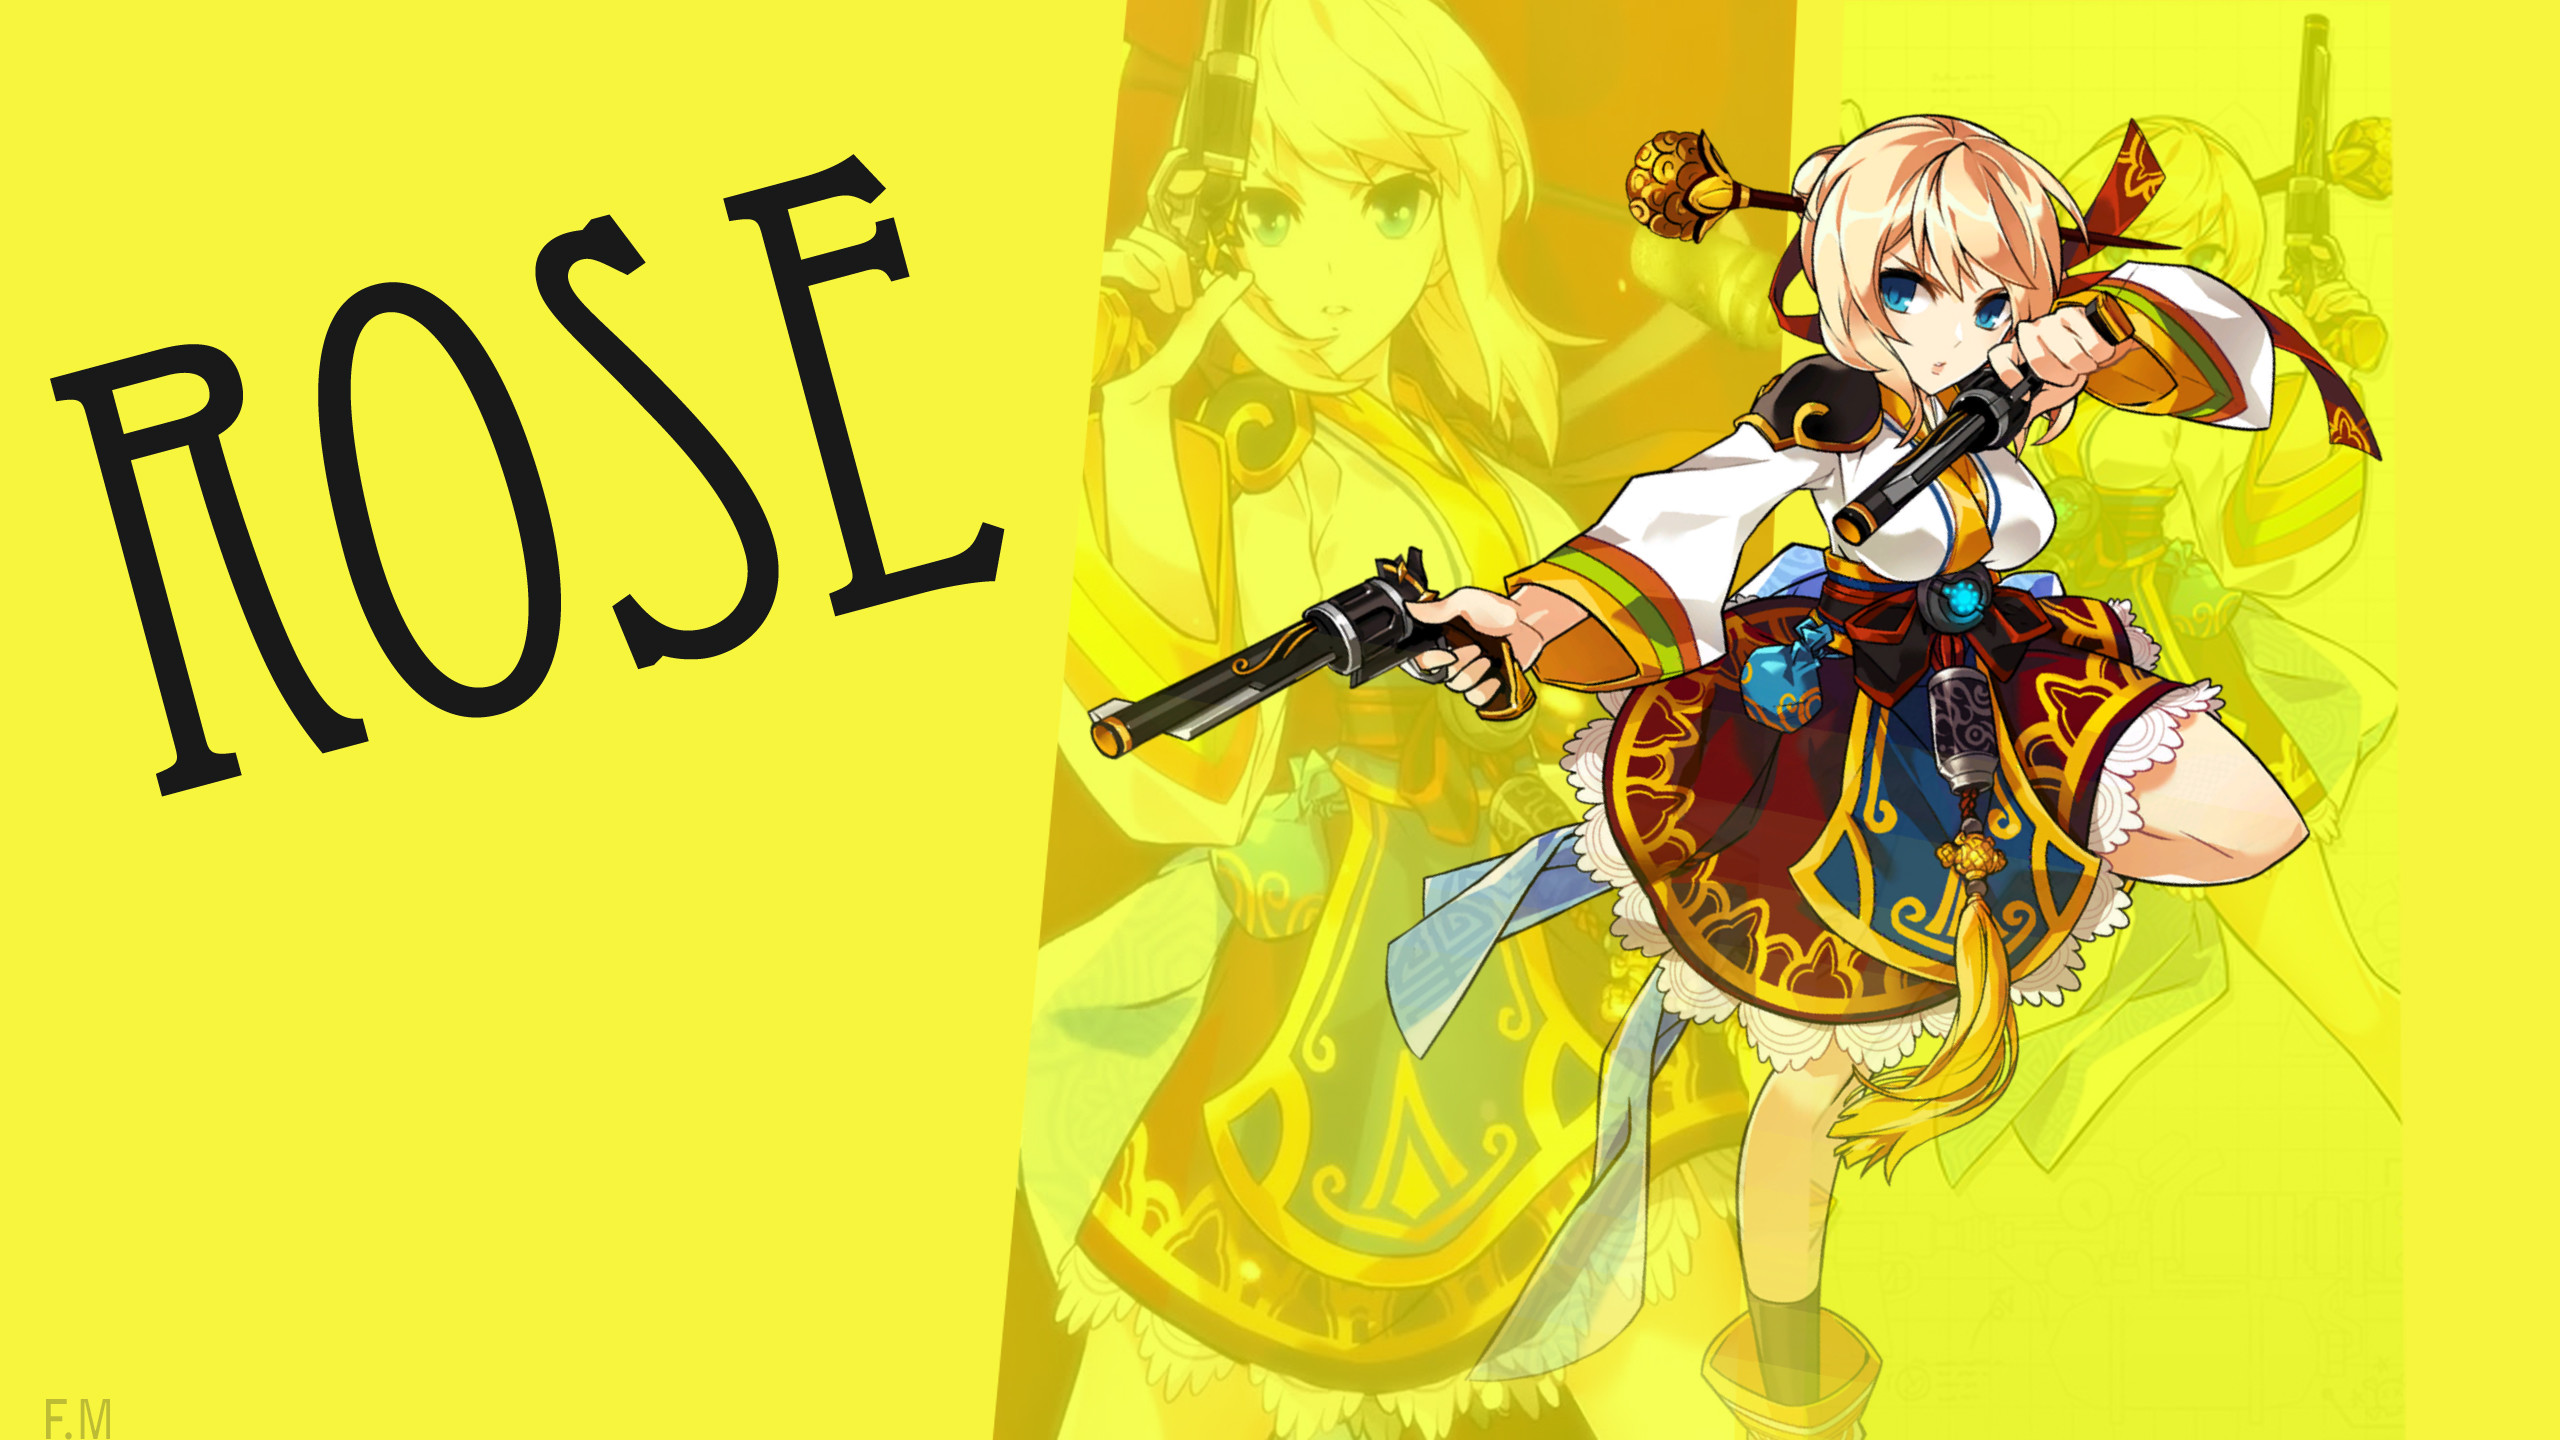 2560x1440 ... Rose (Elsword) - Wallpaper by FireMinnie